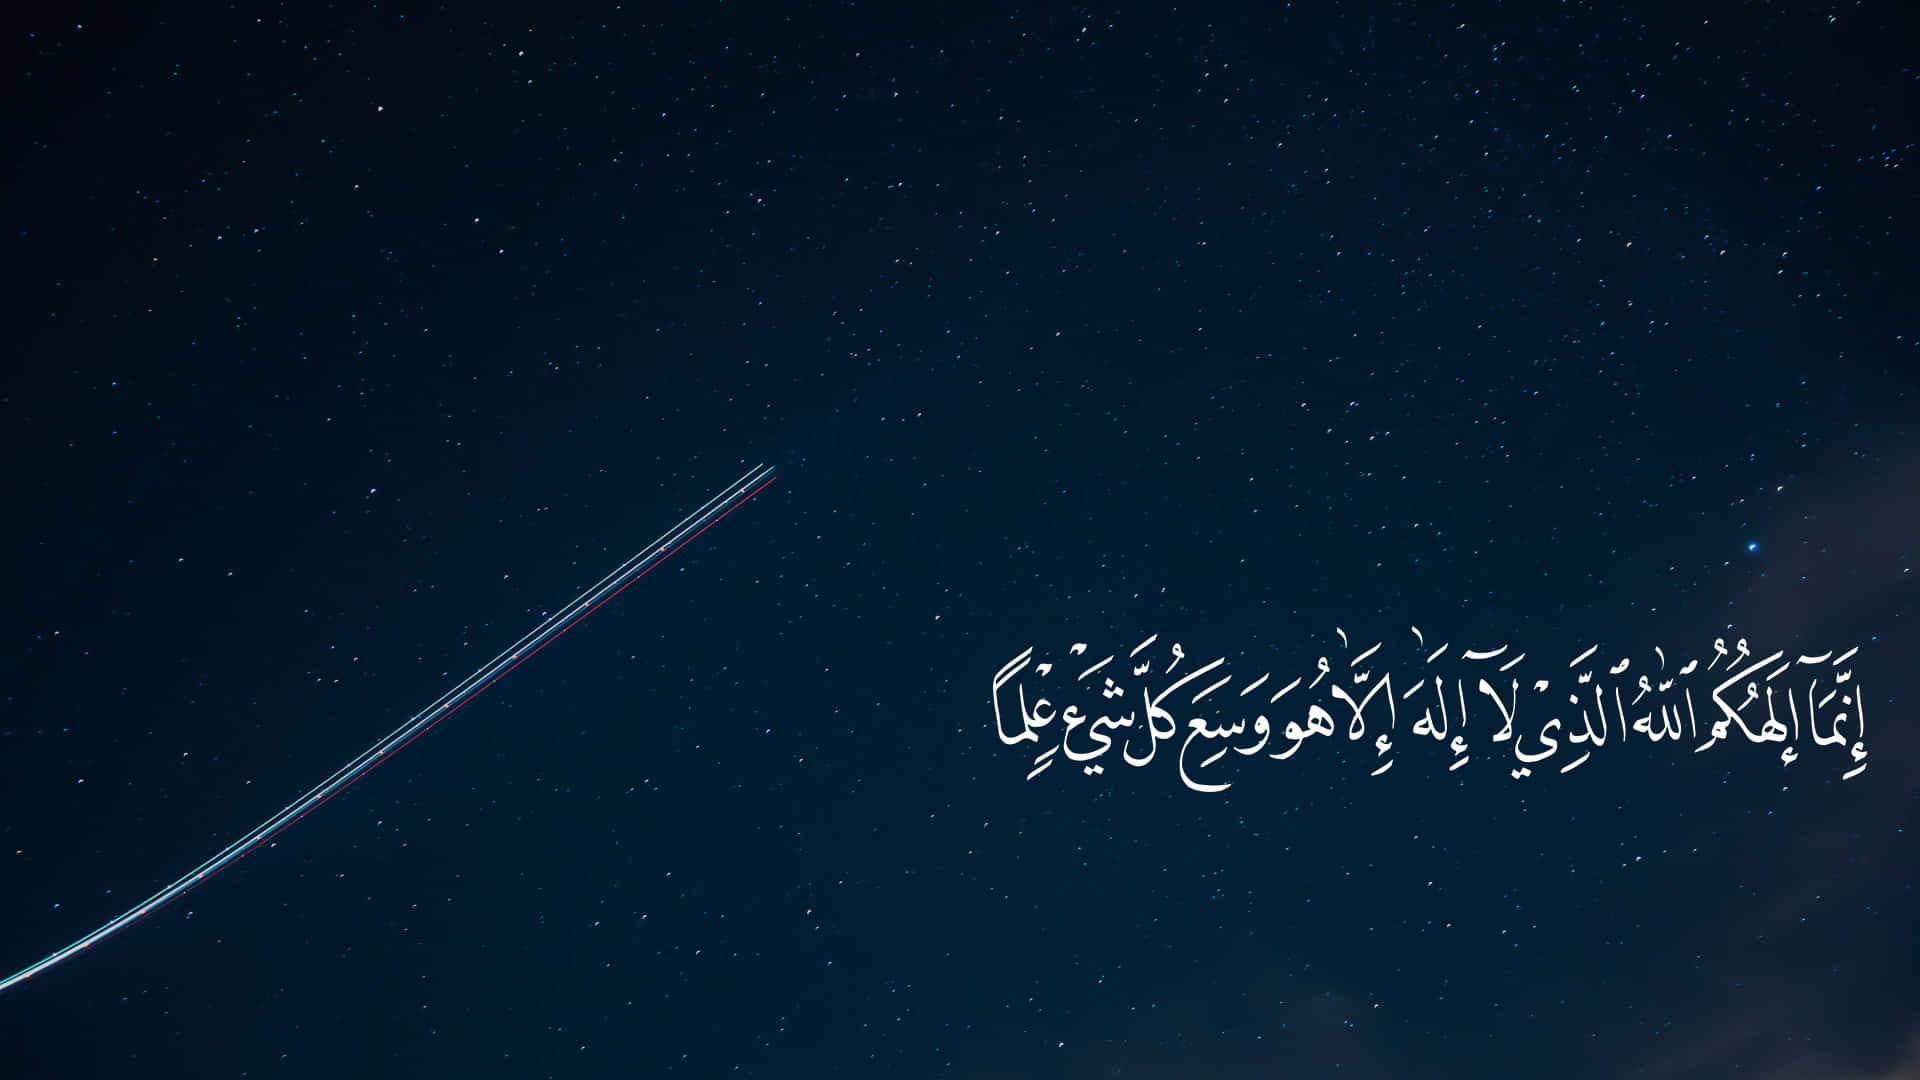 Starry_ Night_with_ Arabic_ Calligraphy Wallpaper